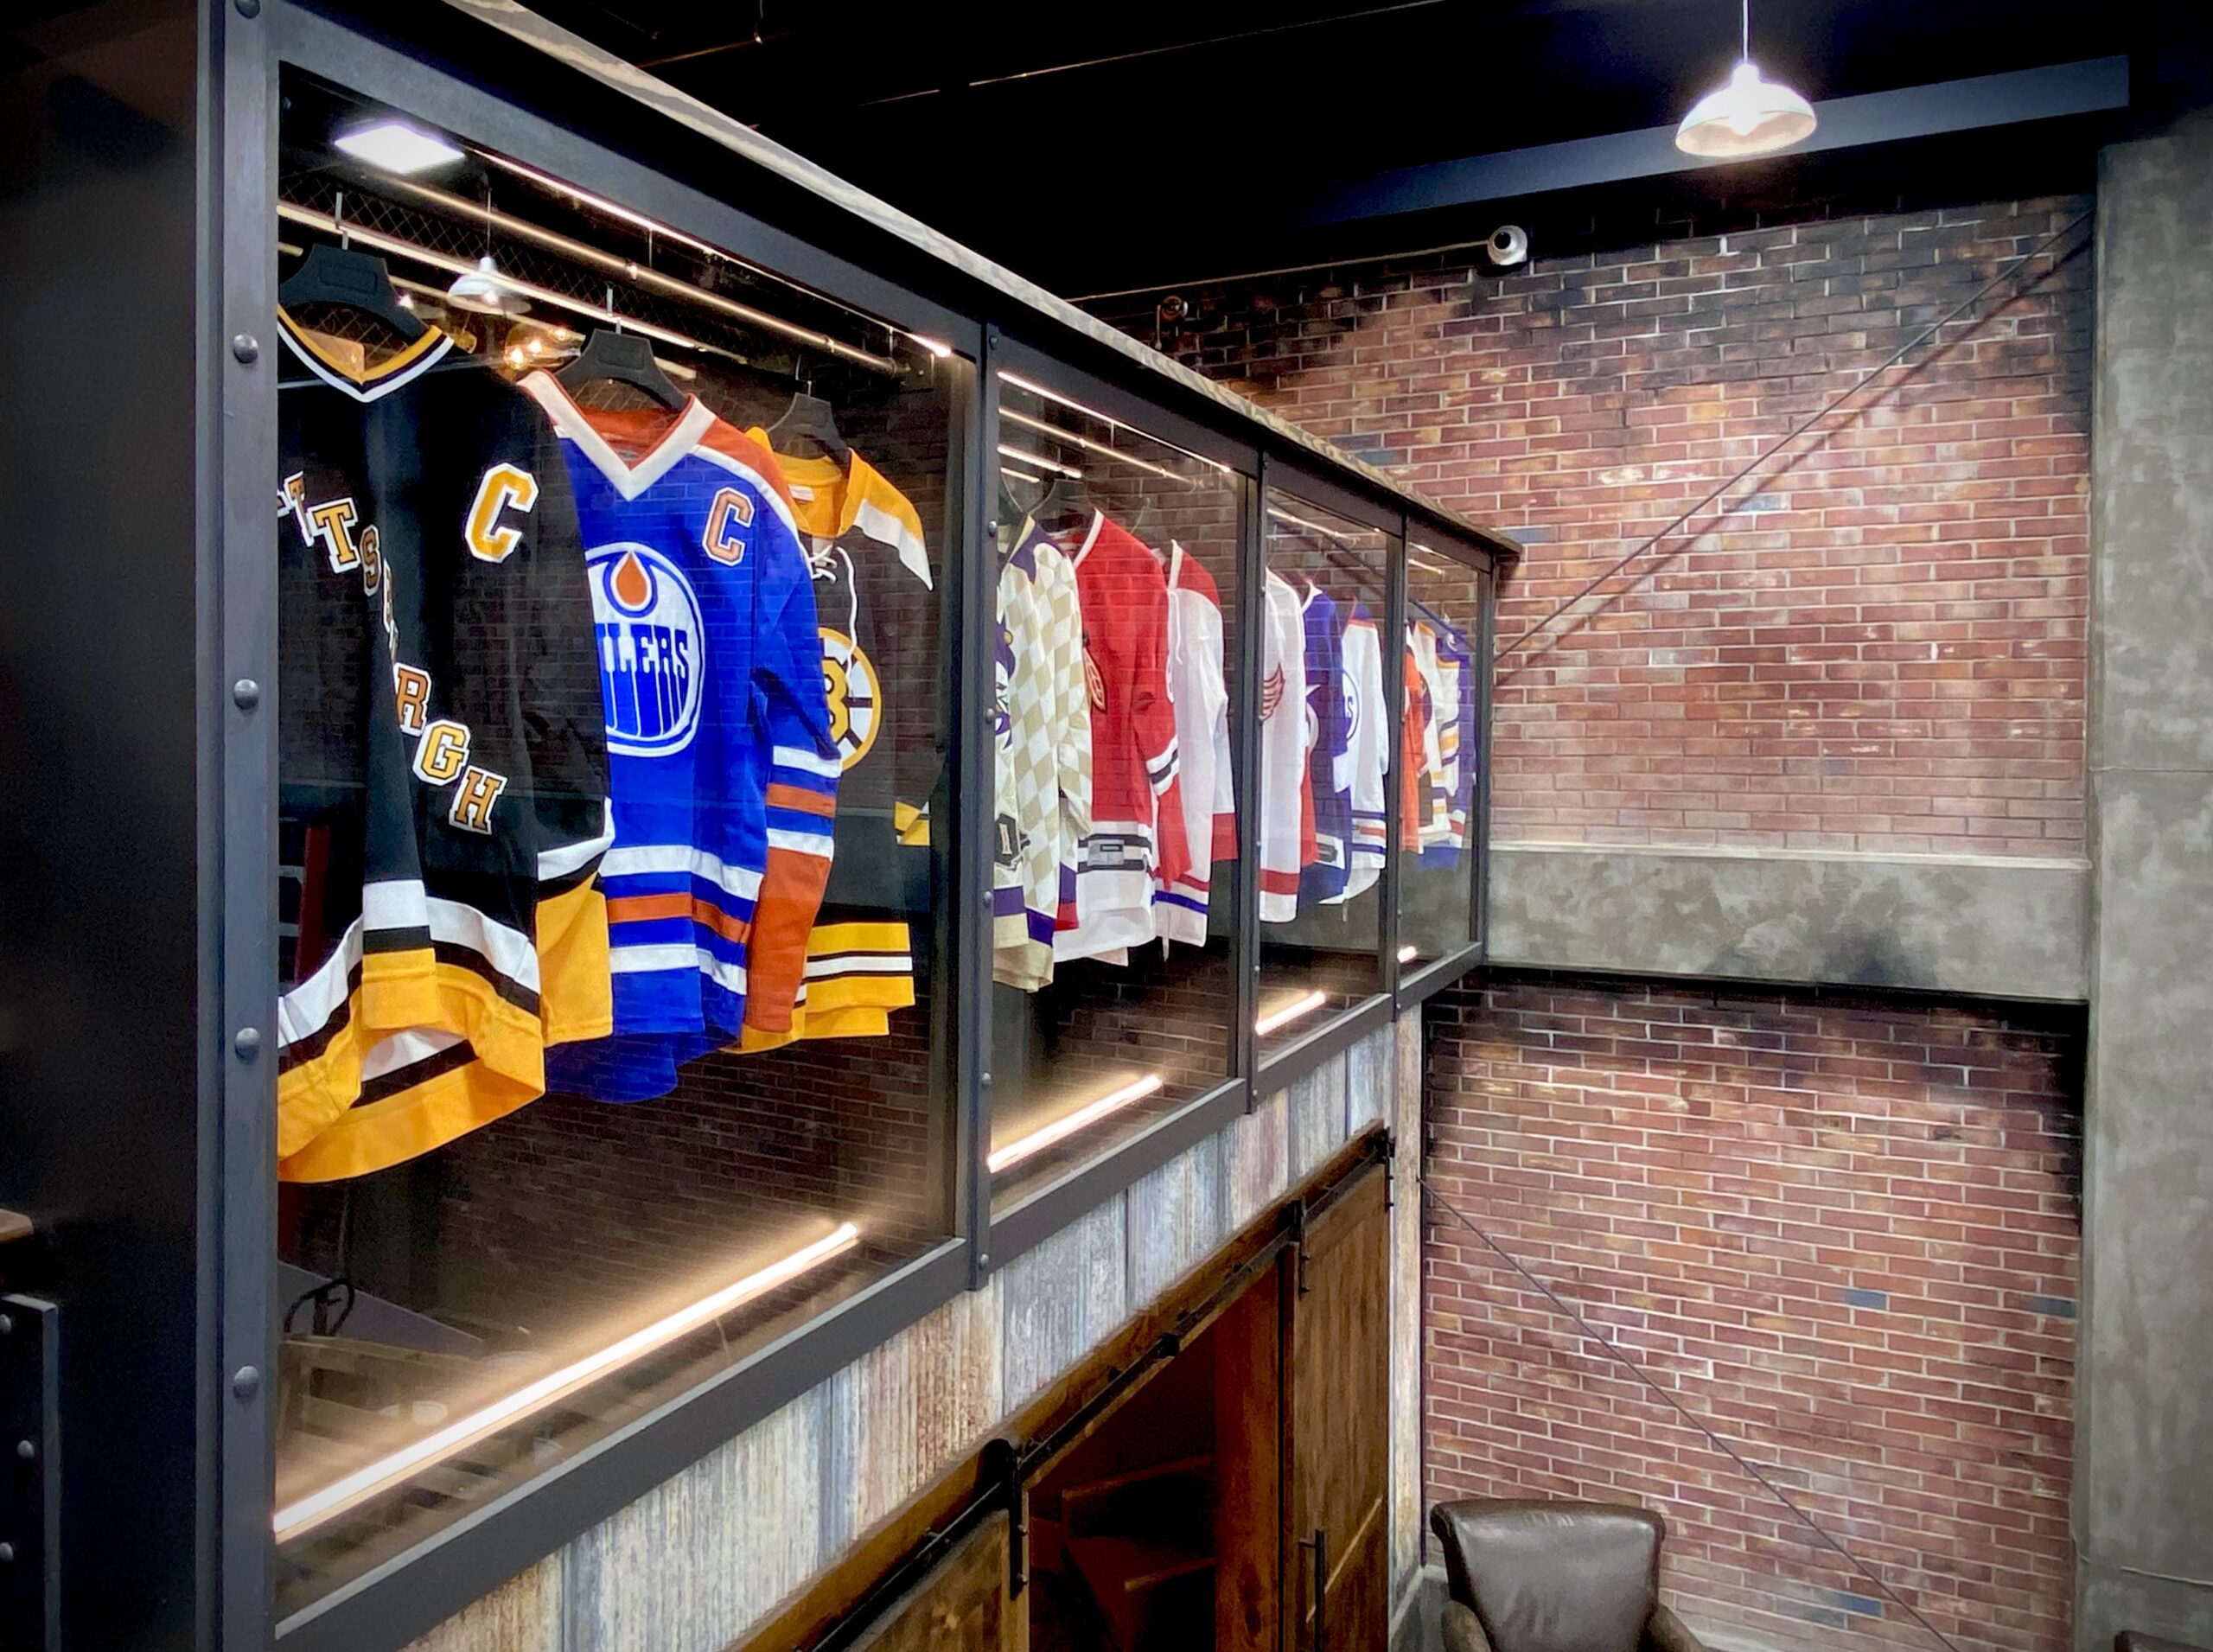 lighted display cases with hockey jerseys